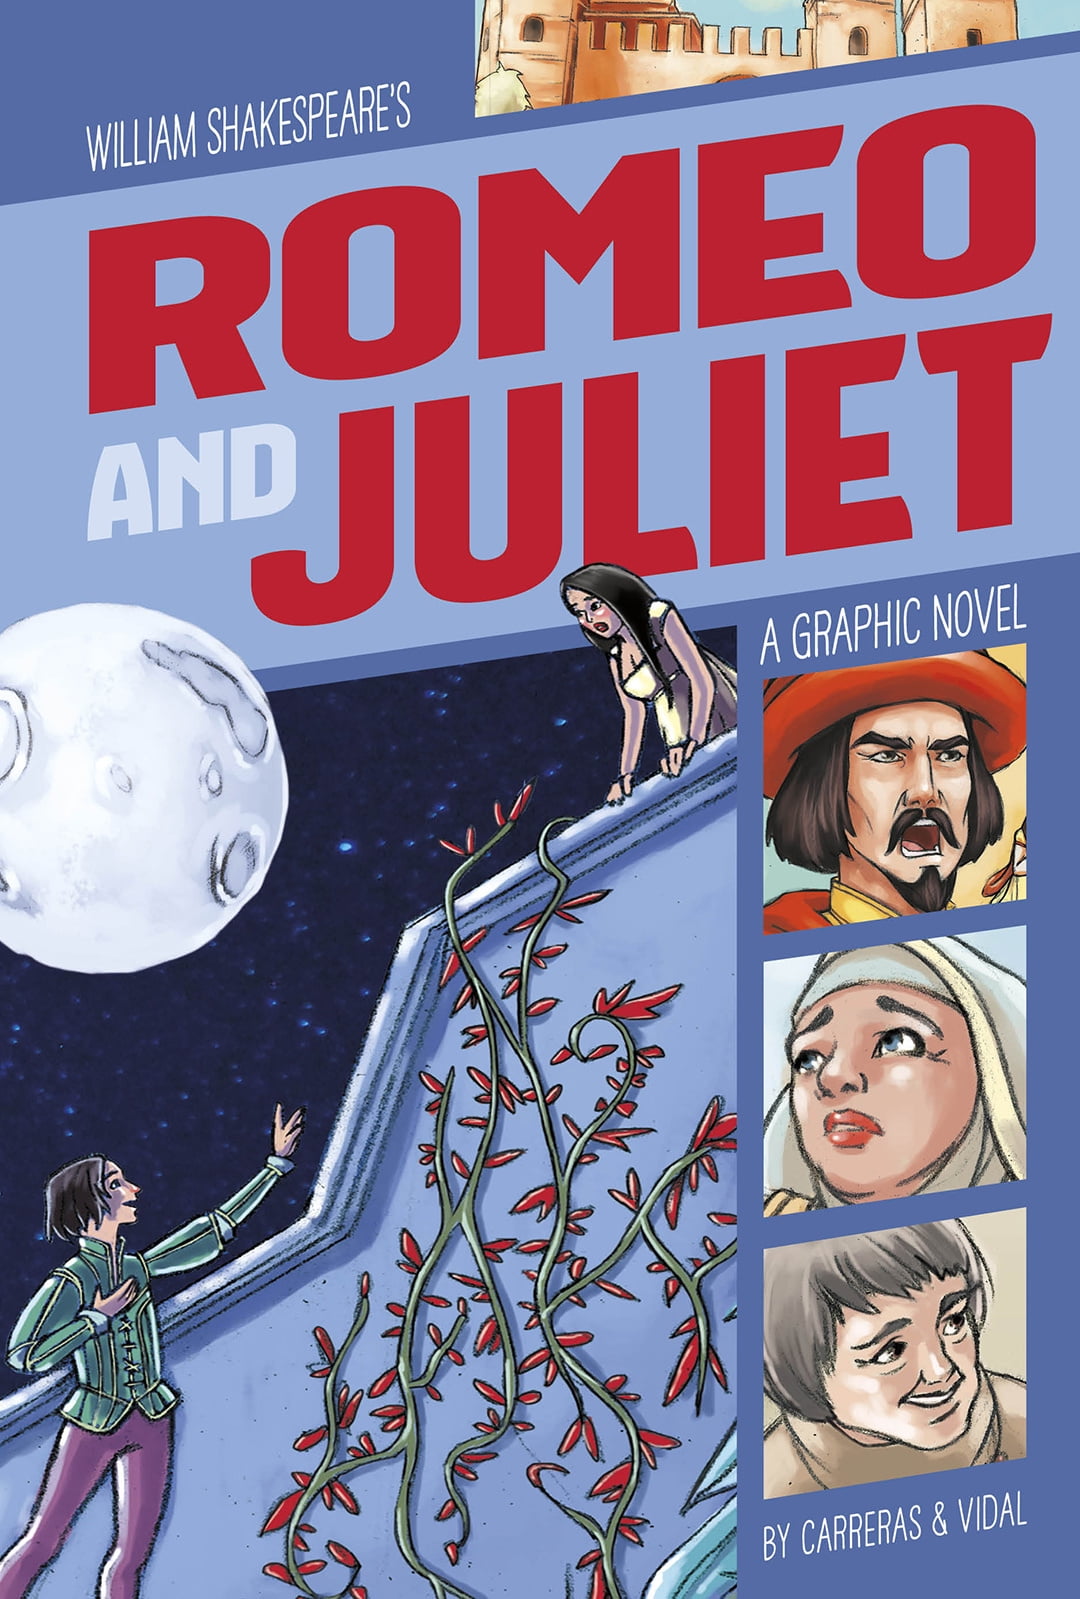 book review romeo and juliet